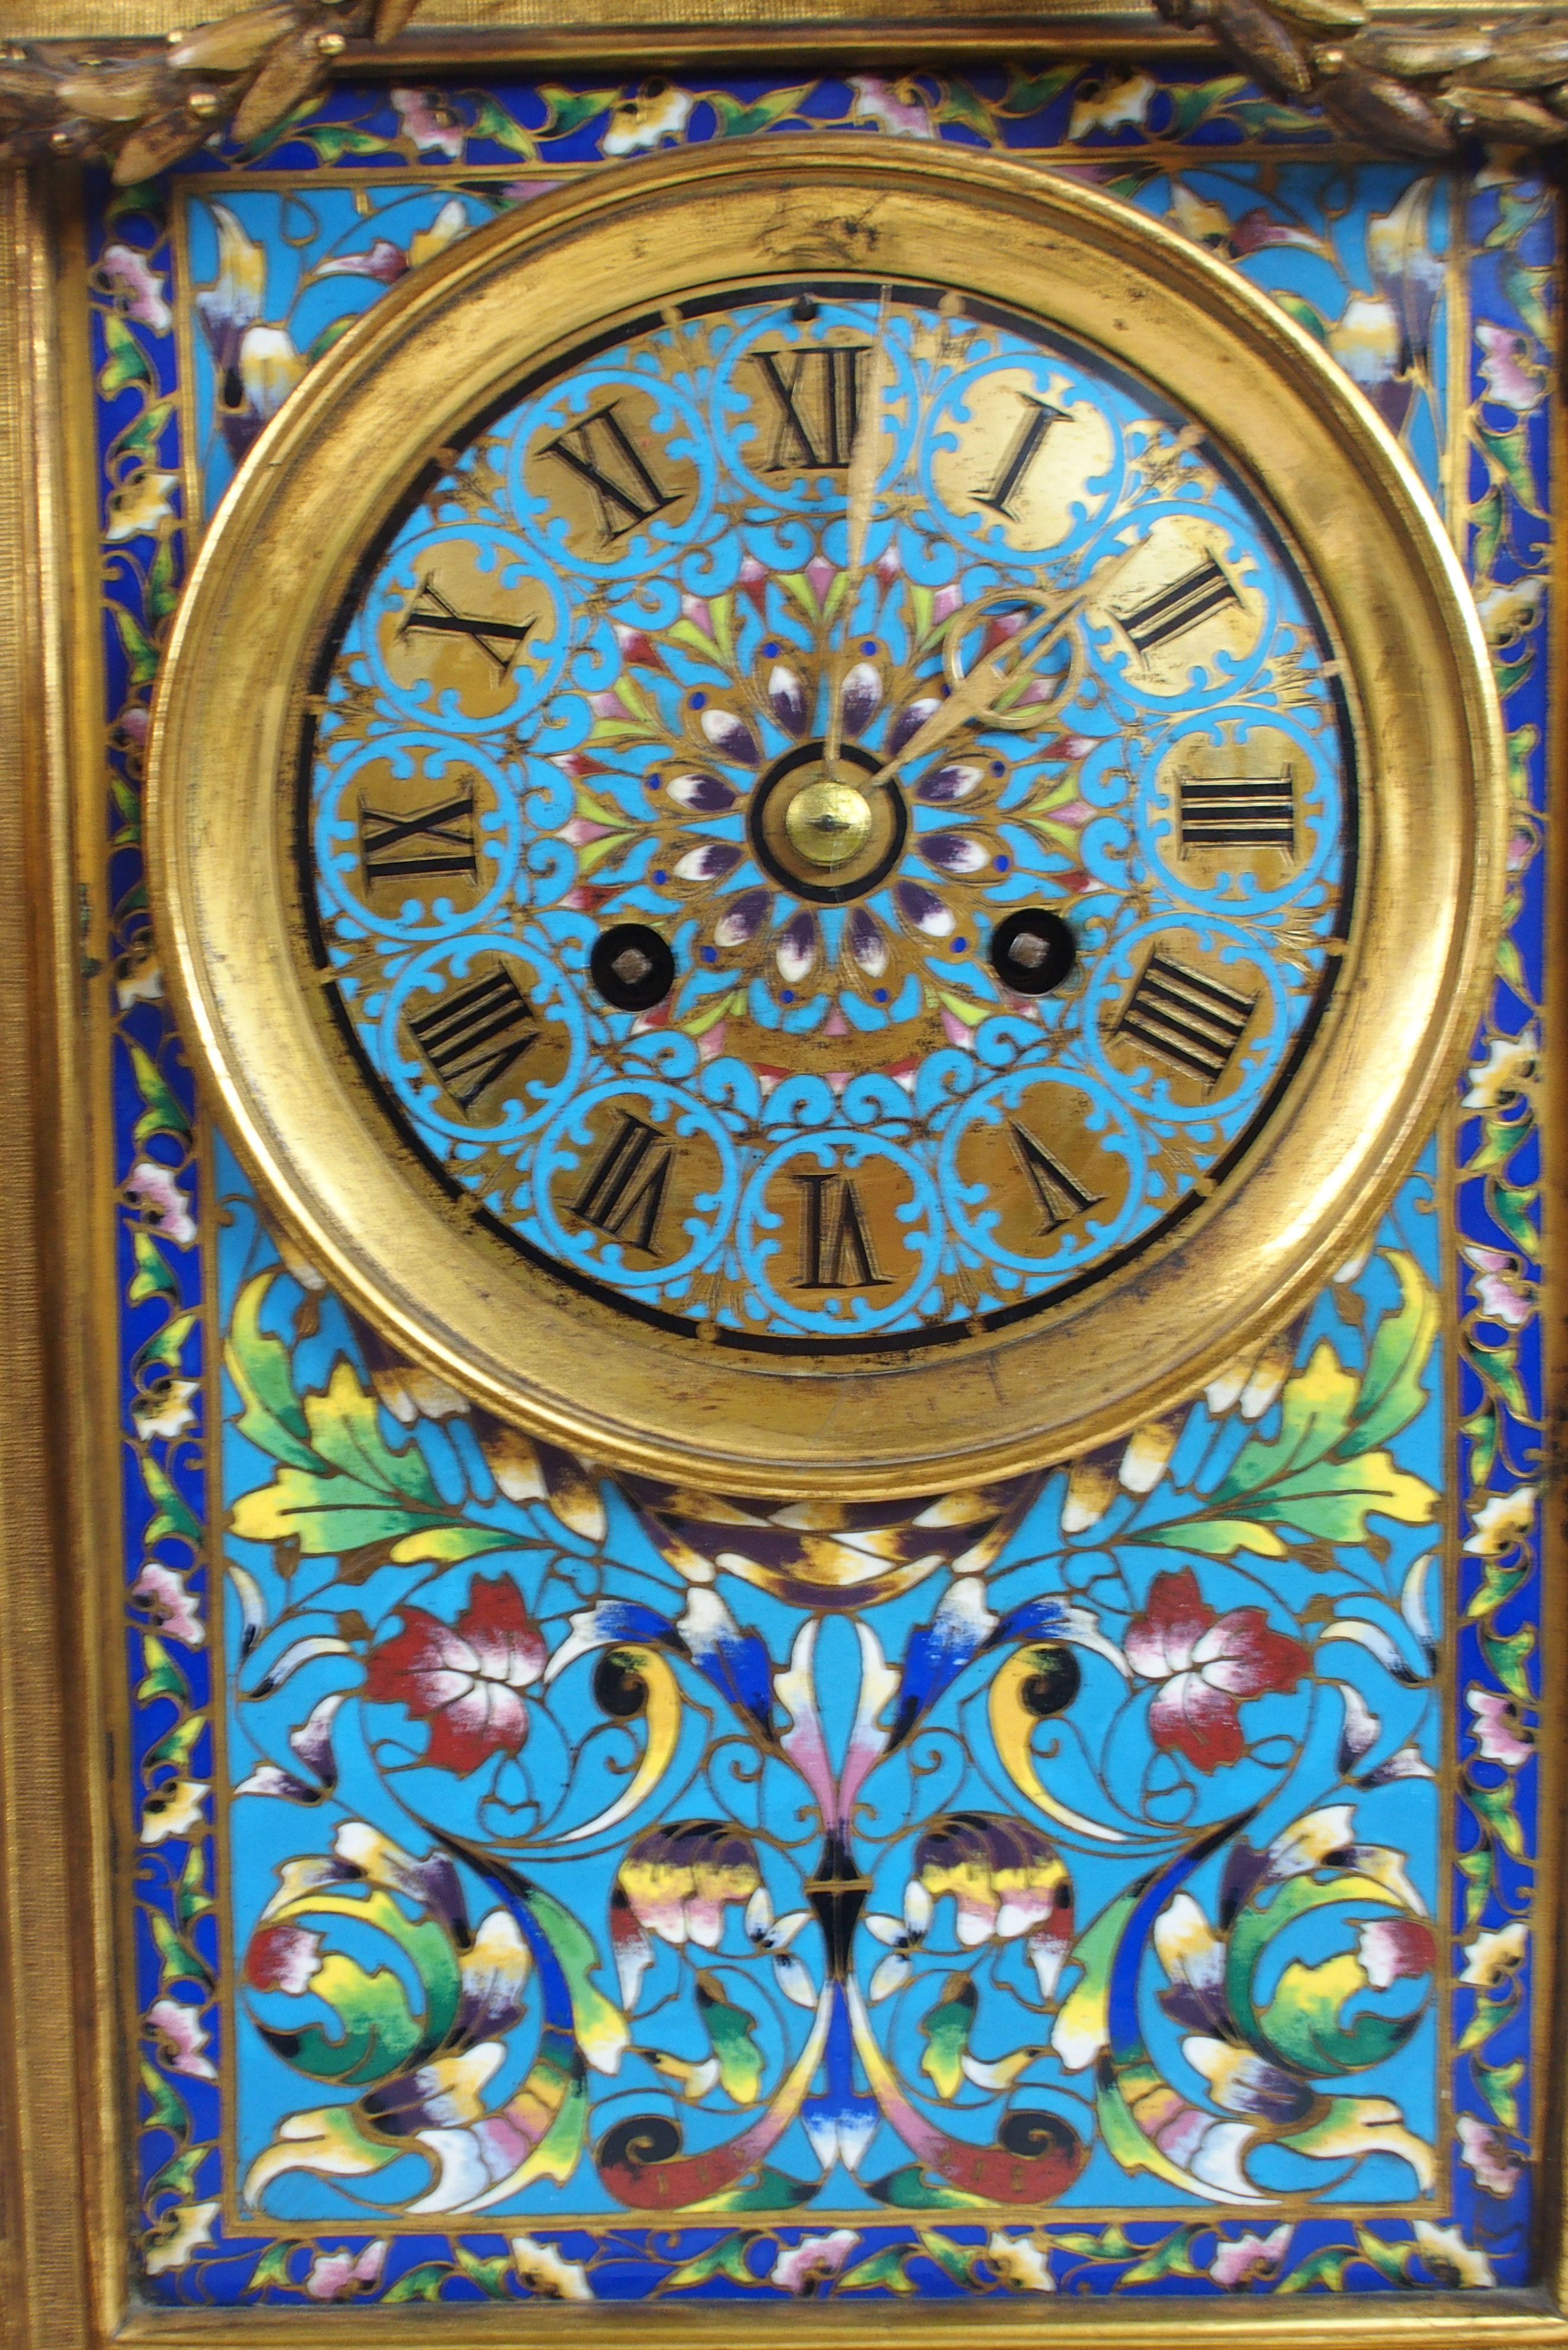 AN IMPRESSIVE 19TH CENTURY FRENCH CHAMPLEVE ENAMEL MANTLE CLOCK the urn mounted top with griffin han - Image 3 of 15